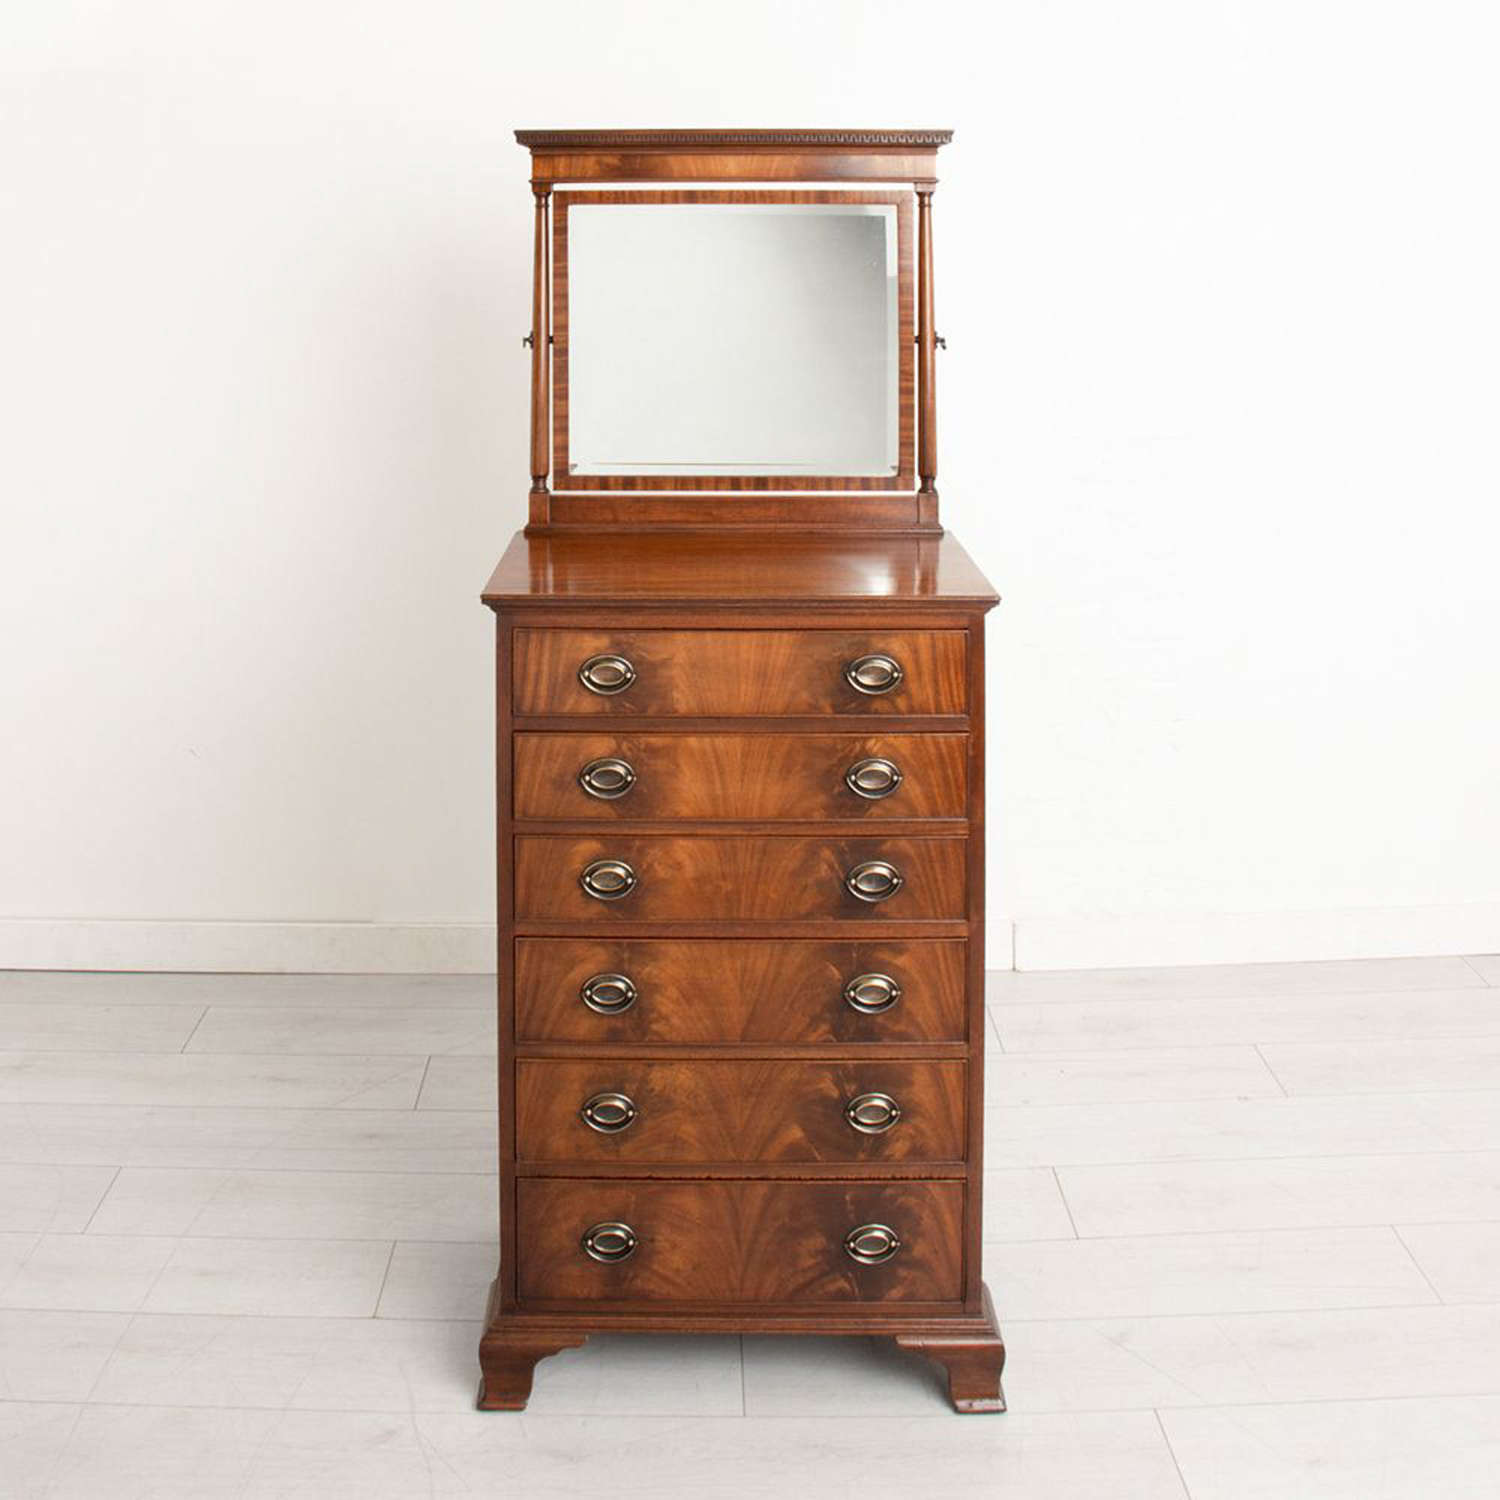 Antique Chest of Drawers with Mirror by Waring & Gillows